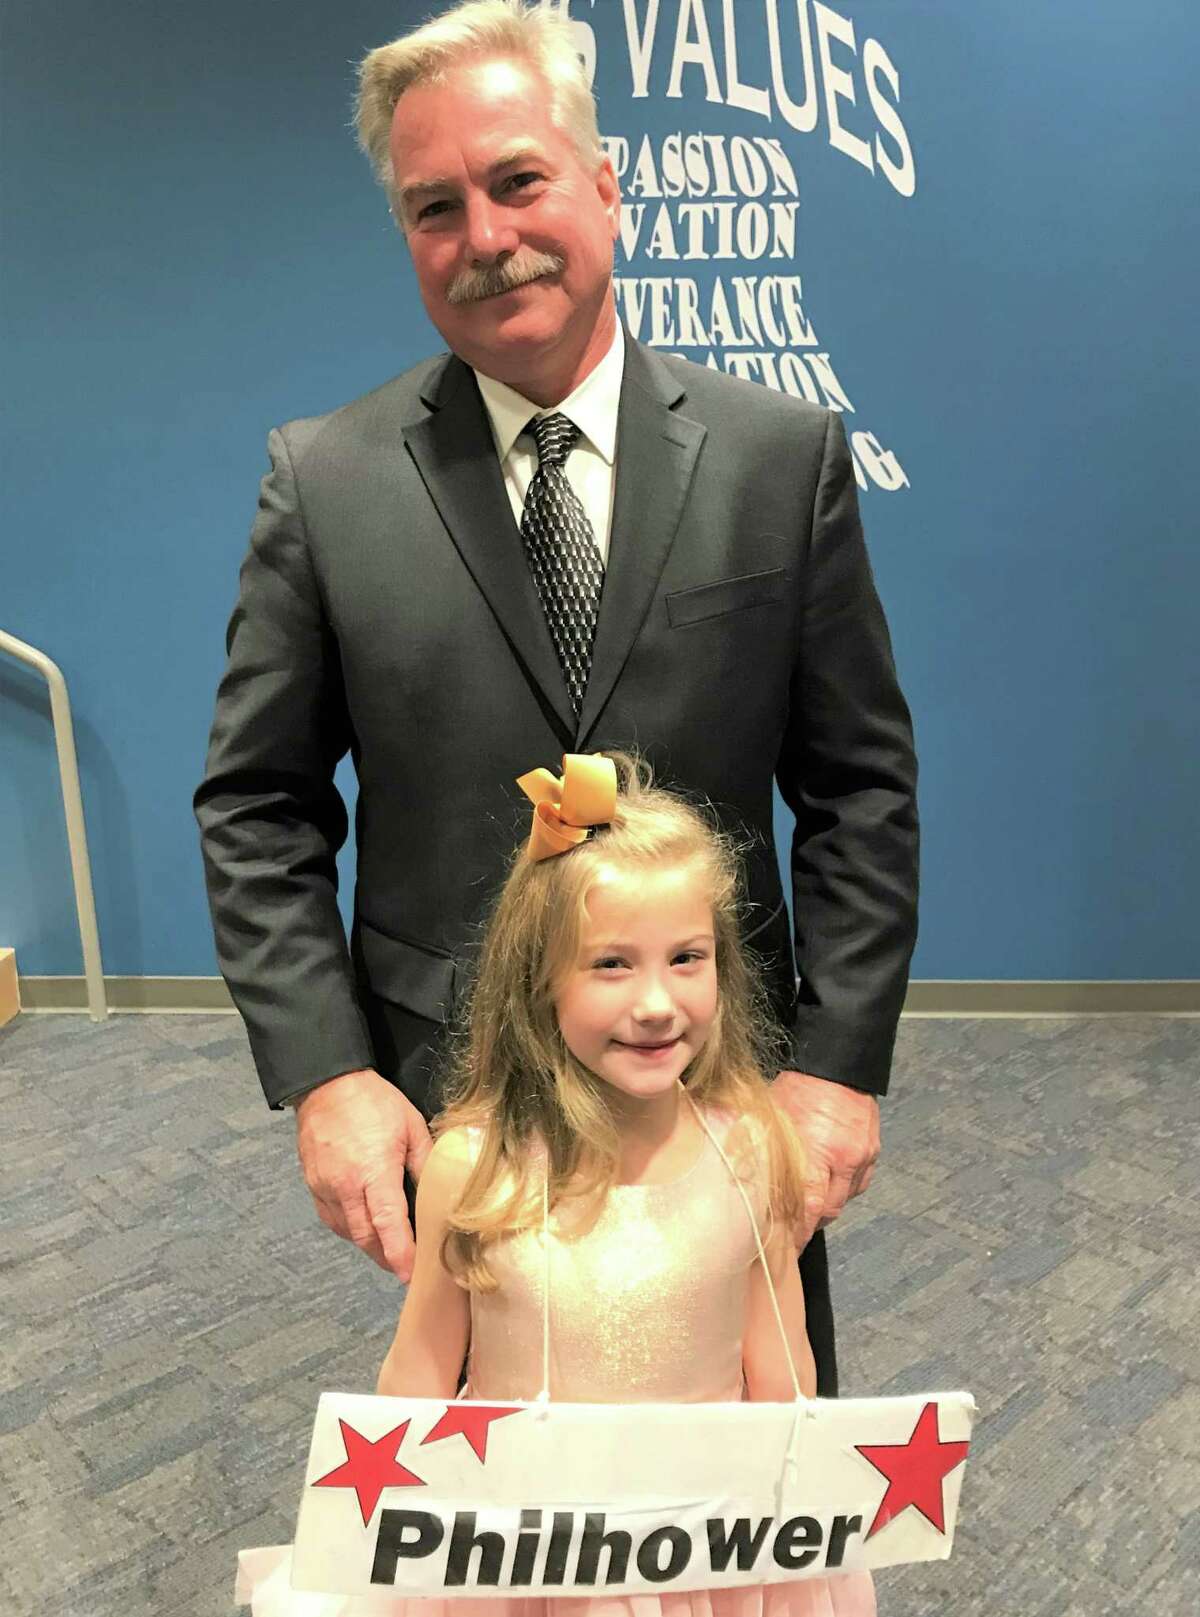 Republican Mark Philhower was the highest vote-getter in the East Hampton Town Council race, with 1,821 votes. He’s shown here with his grand-daughter Sophia.